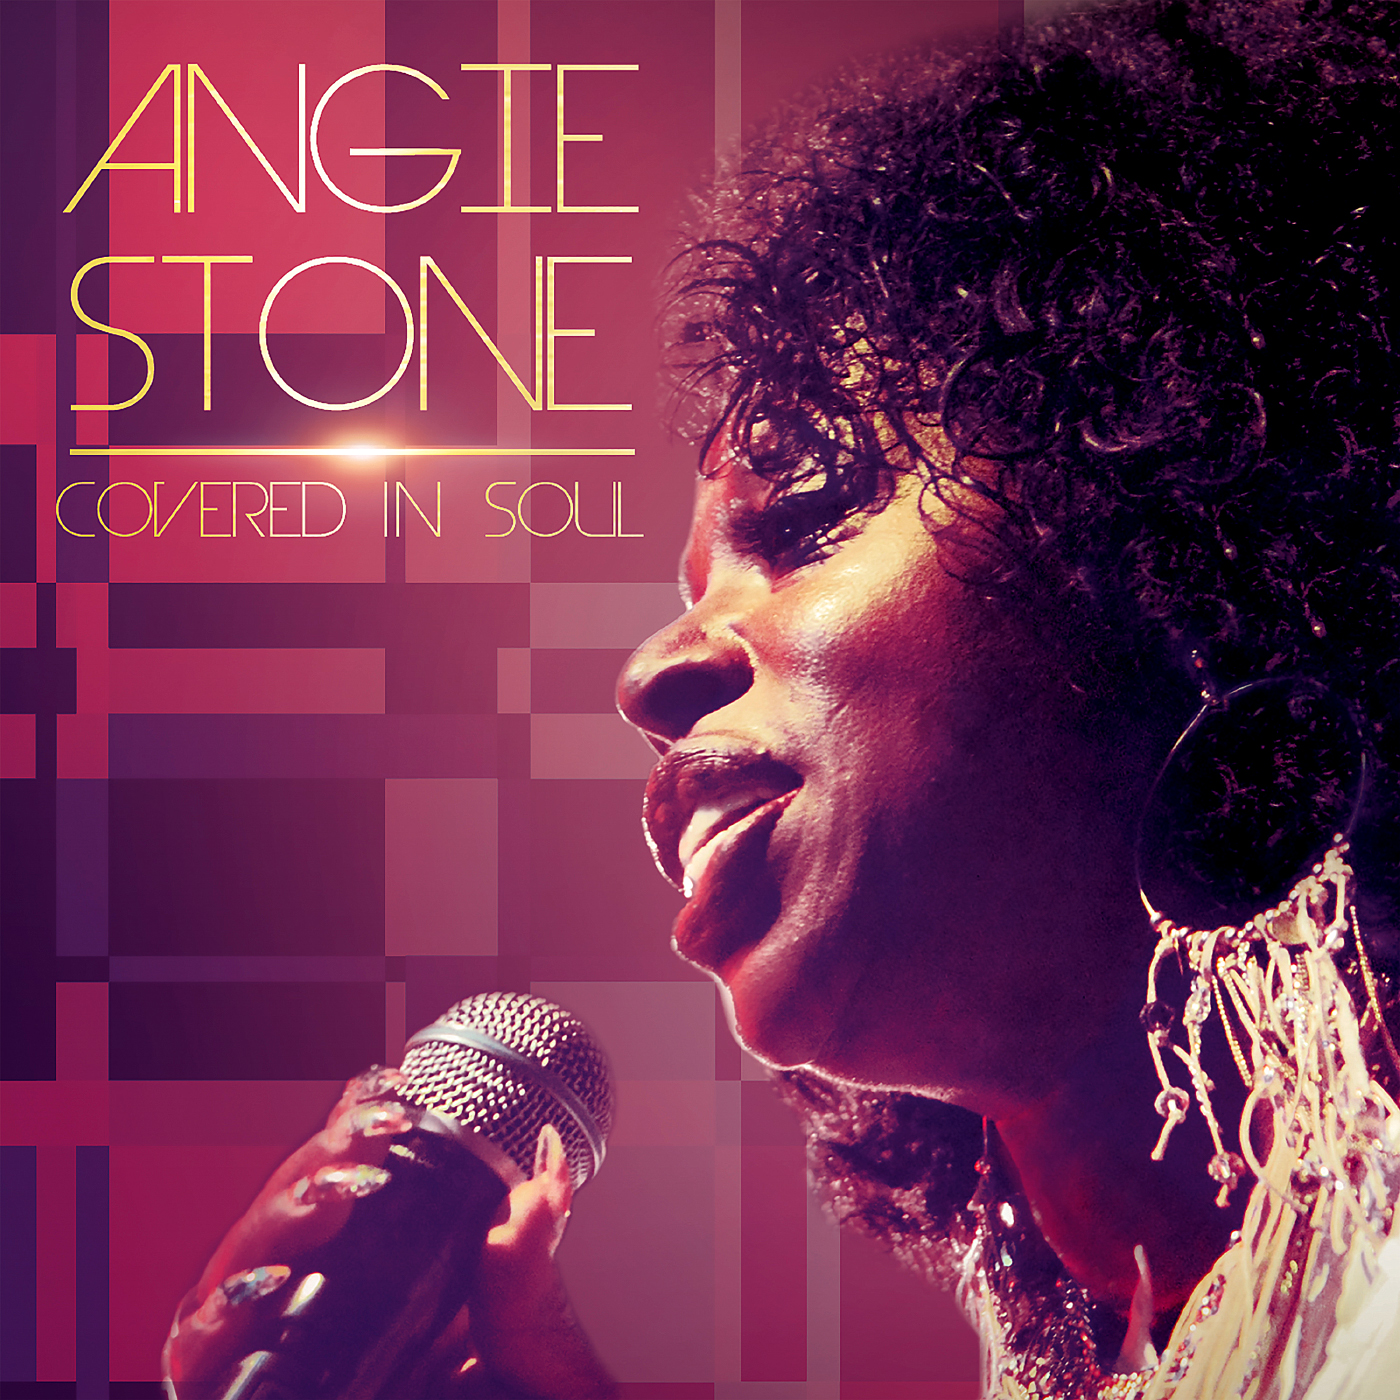  Album cover for Angie Stone 2016. 